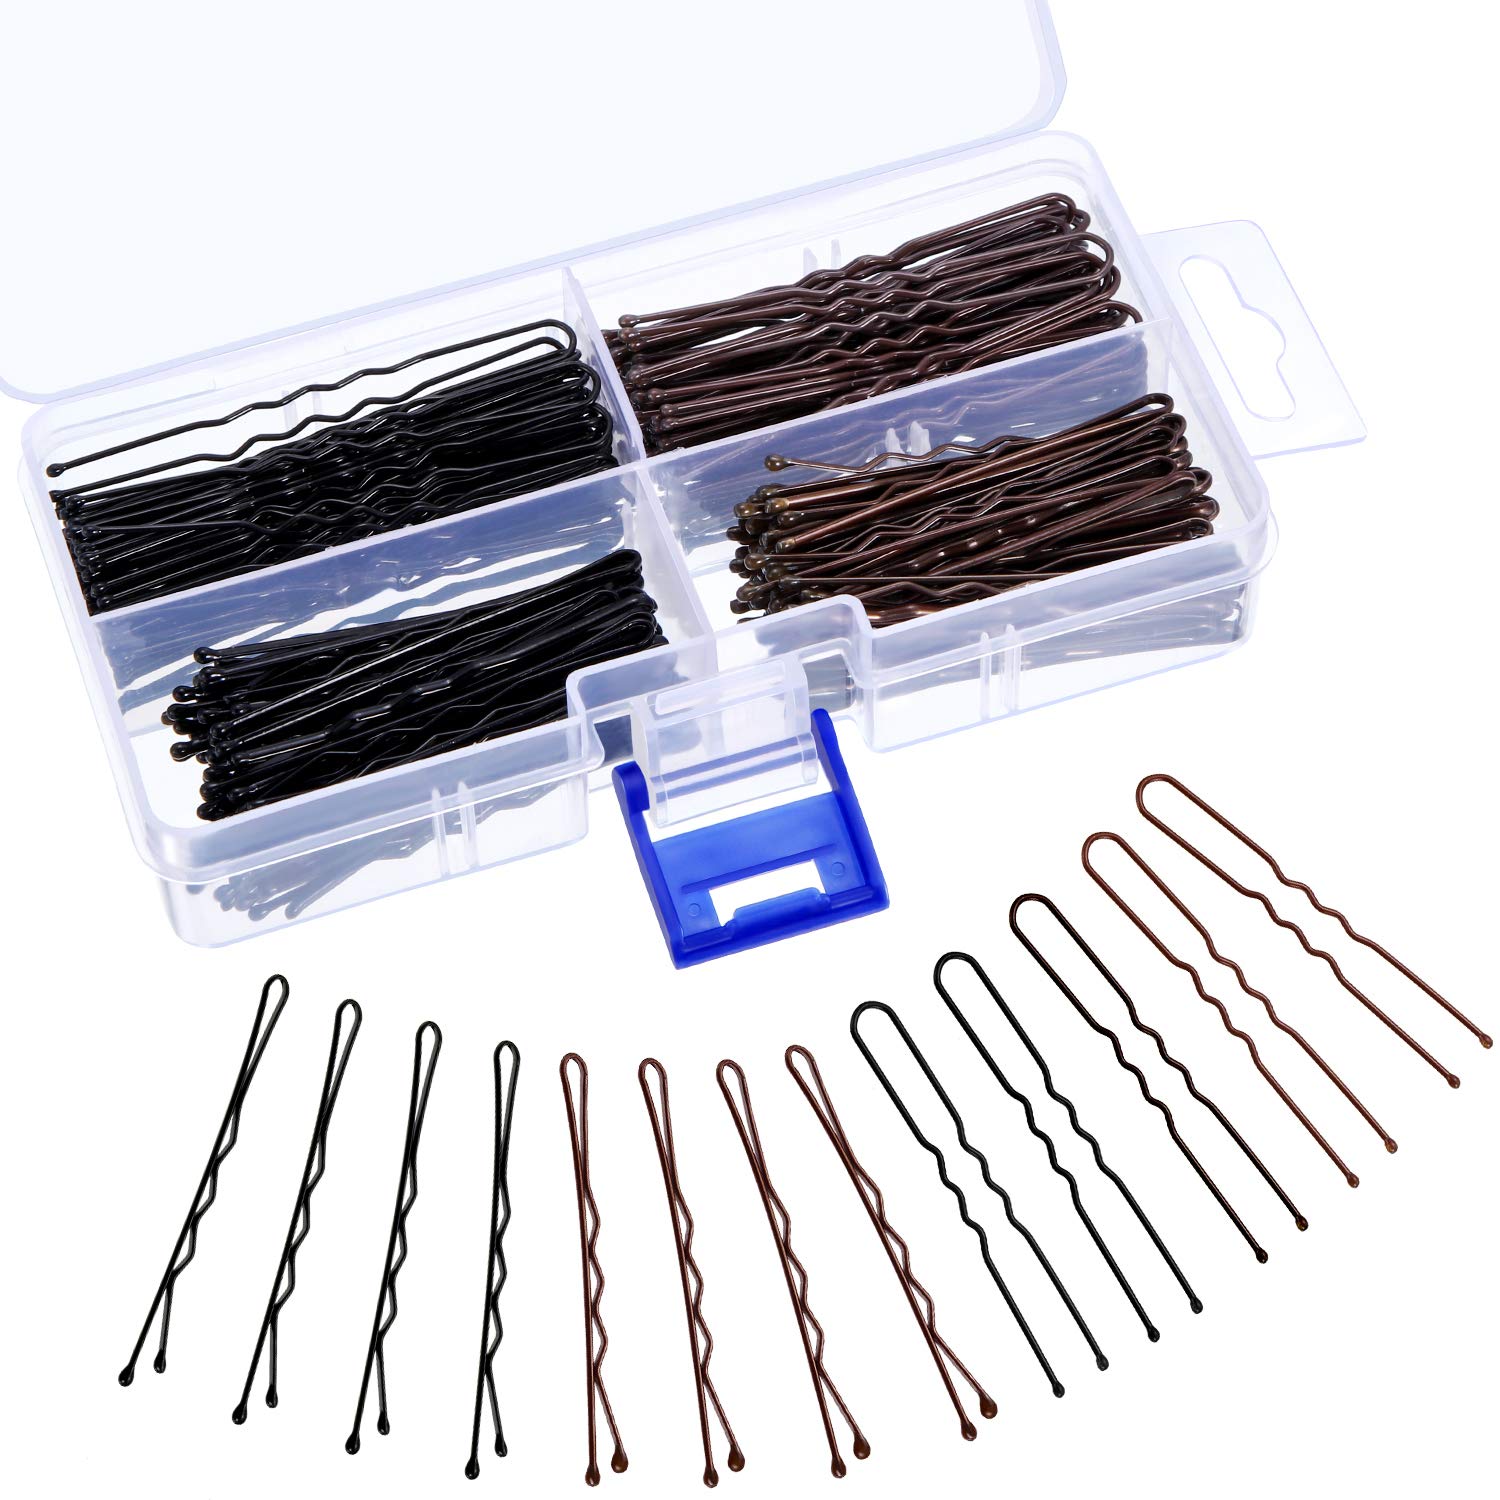 Hicarer 200 Pieces Hair Pins Bobby Pins U Shaped Hair Clips Metal